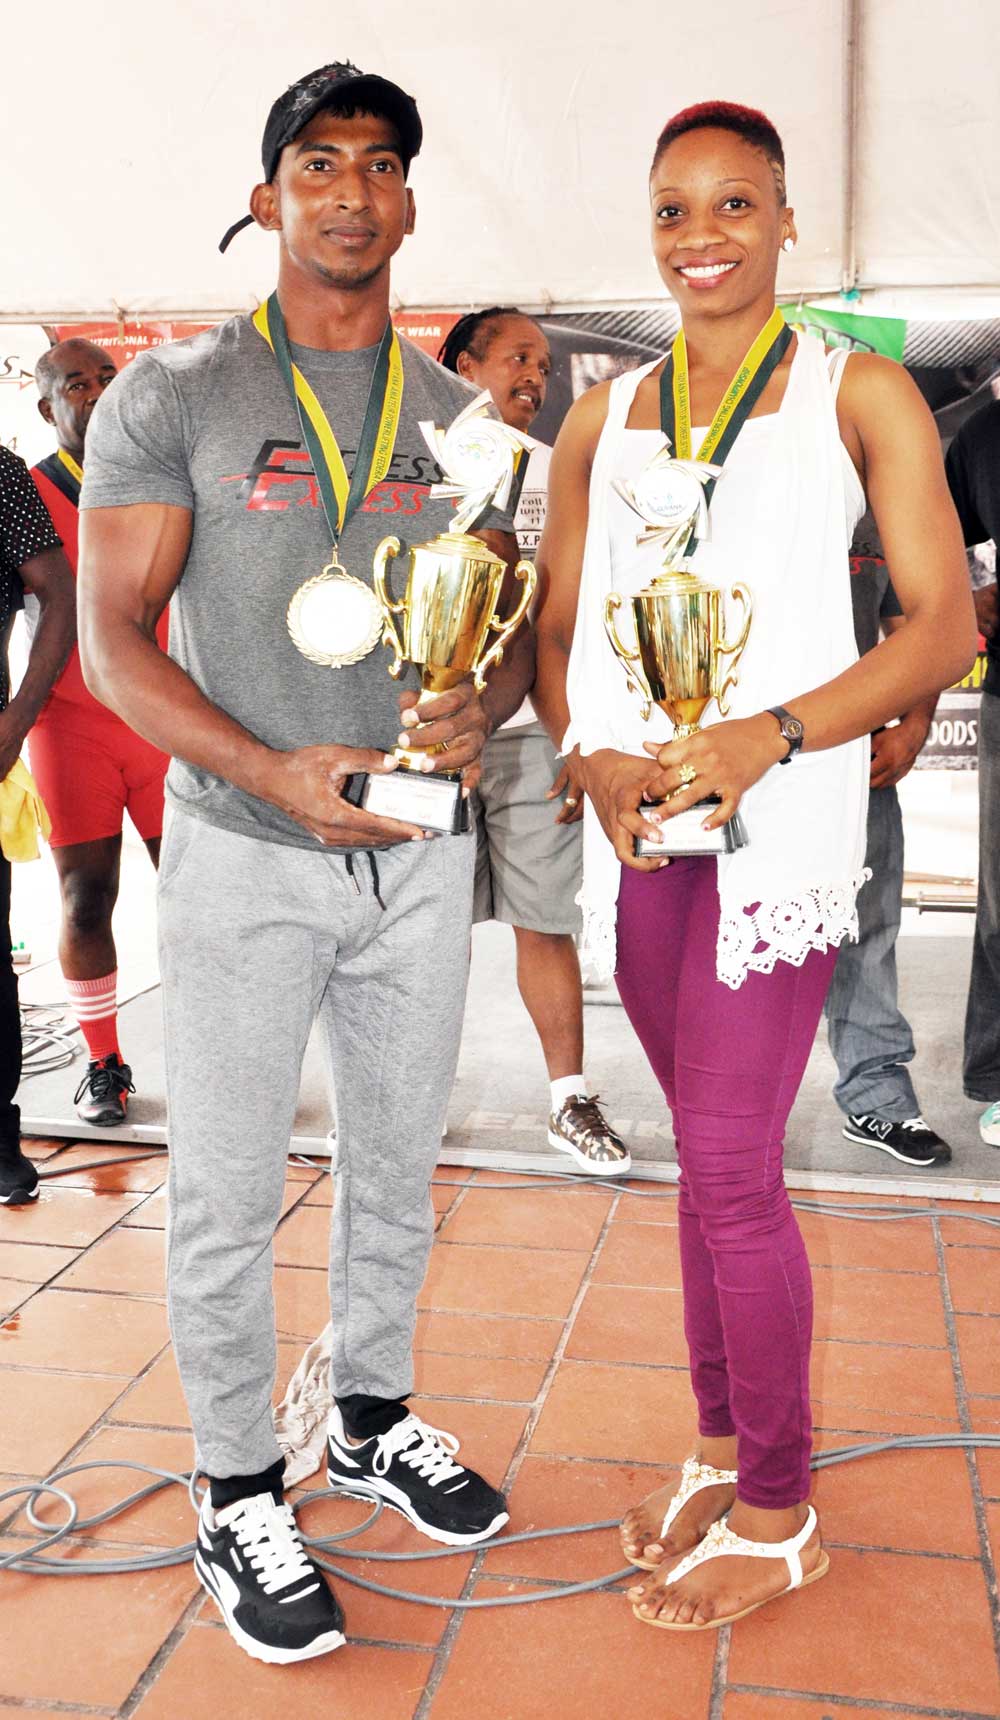 https://www.kaieteurnewsonline.com/images/2017/12/Vijai-Rahim-and-Grace-Bobb-displaying-their-Overall-winner-trophies-and-medals..jpg